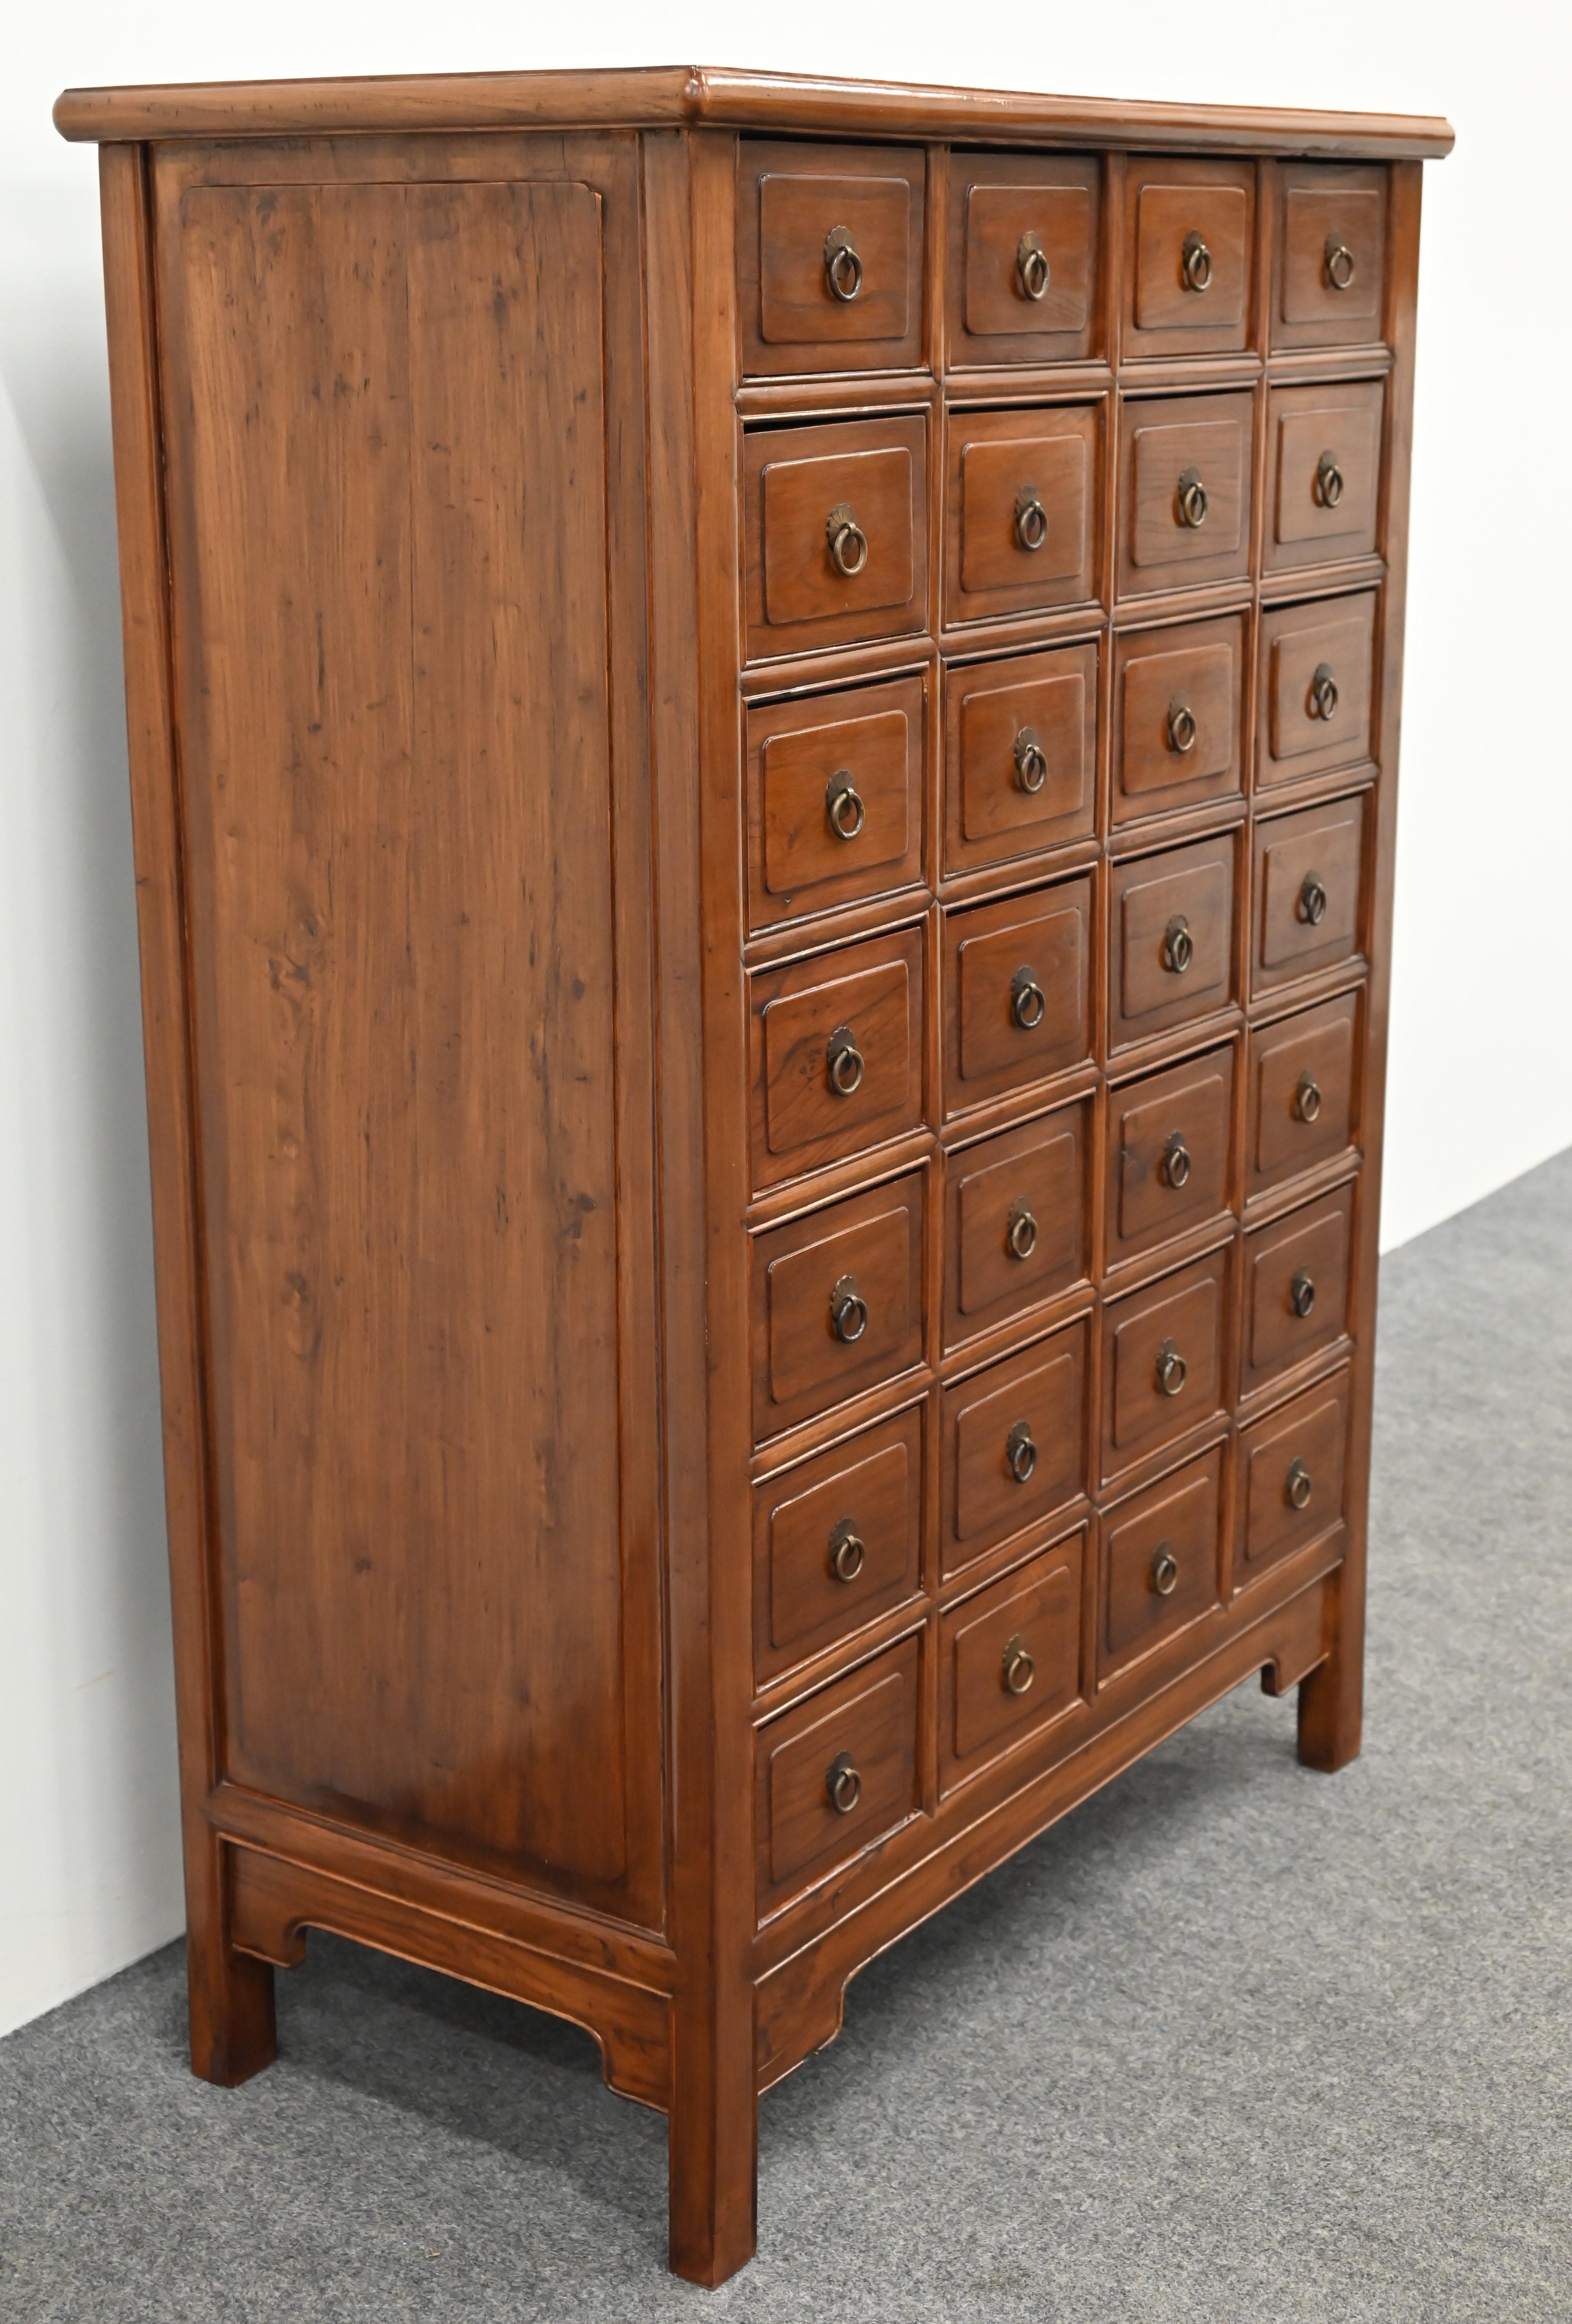 Chinese Apothecary Cabinet with 28 Drawers in Elmwood, 20th Century For Sale 3